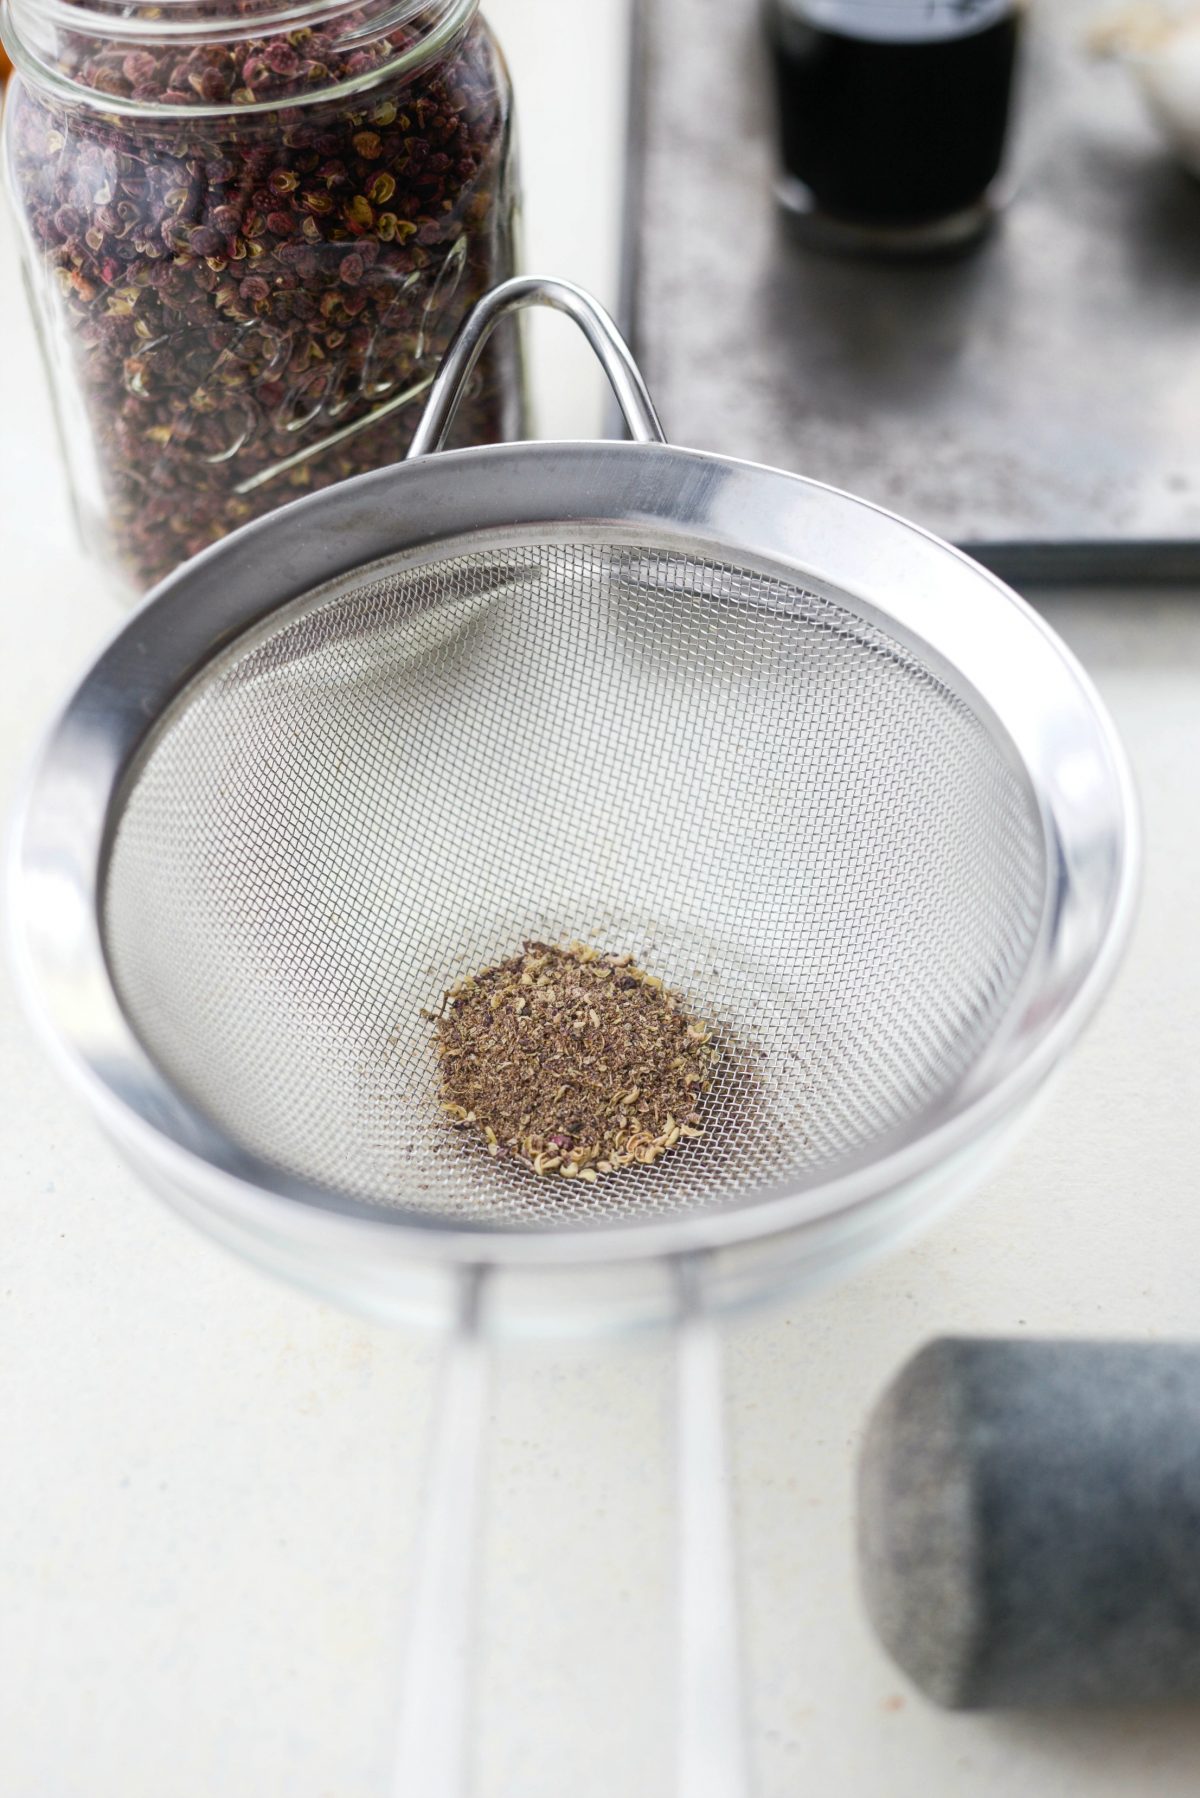 How To Prepare Szechuan Peppercorns l SimplyScratch.com #howto #prepare #szechuan #peppercorns #grind #spices #how #to